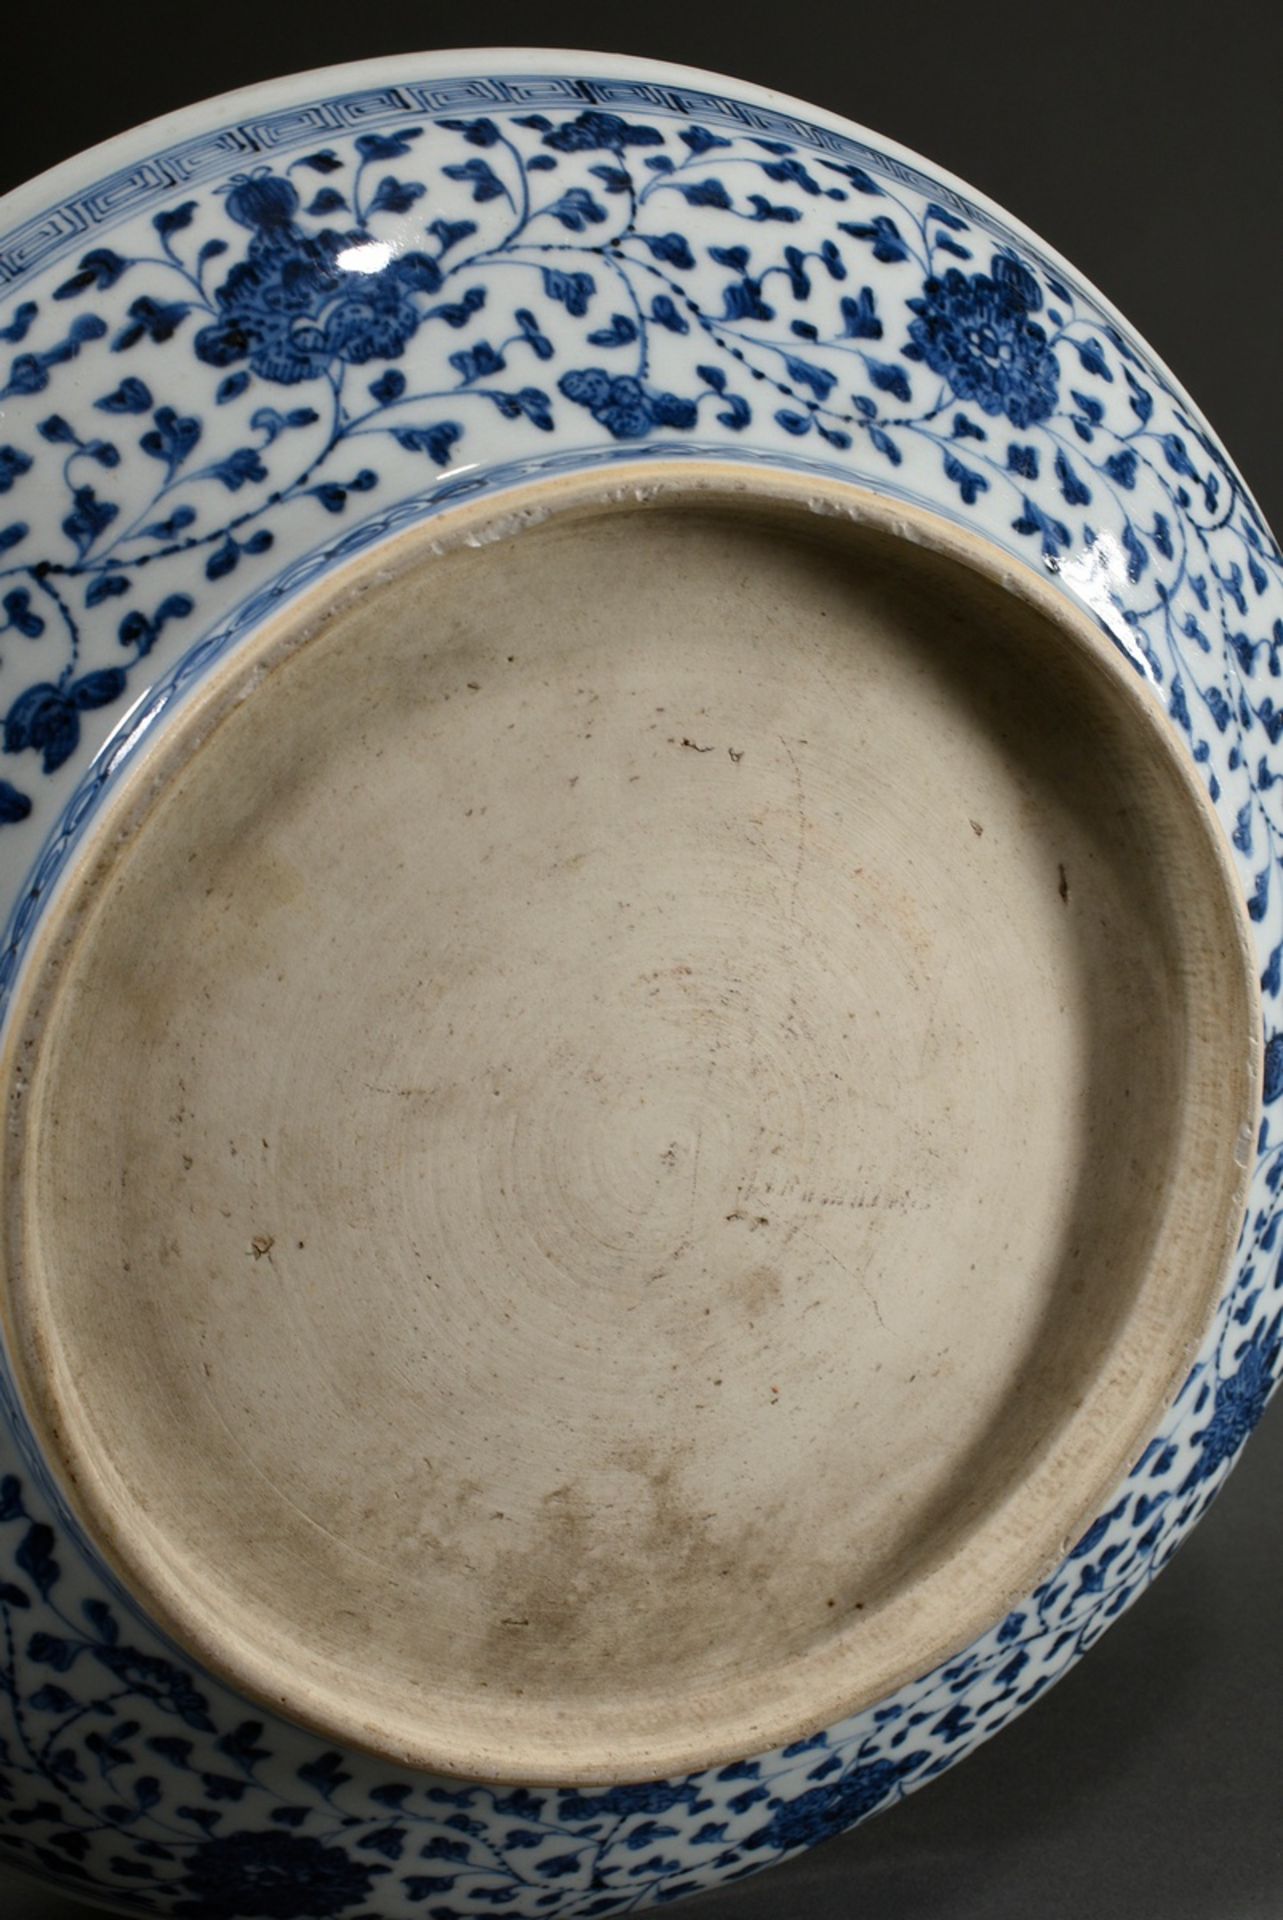 Large bowl in Ming style with blue painting decoration "Lotus blossoms" with meander band, probably - Image 4 of 5